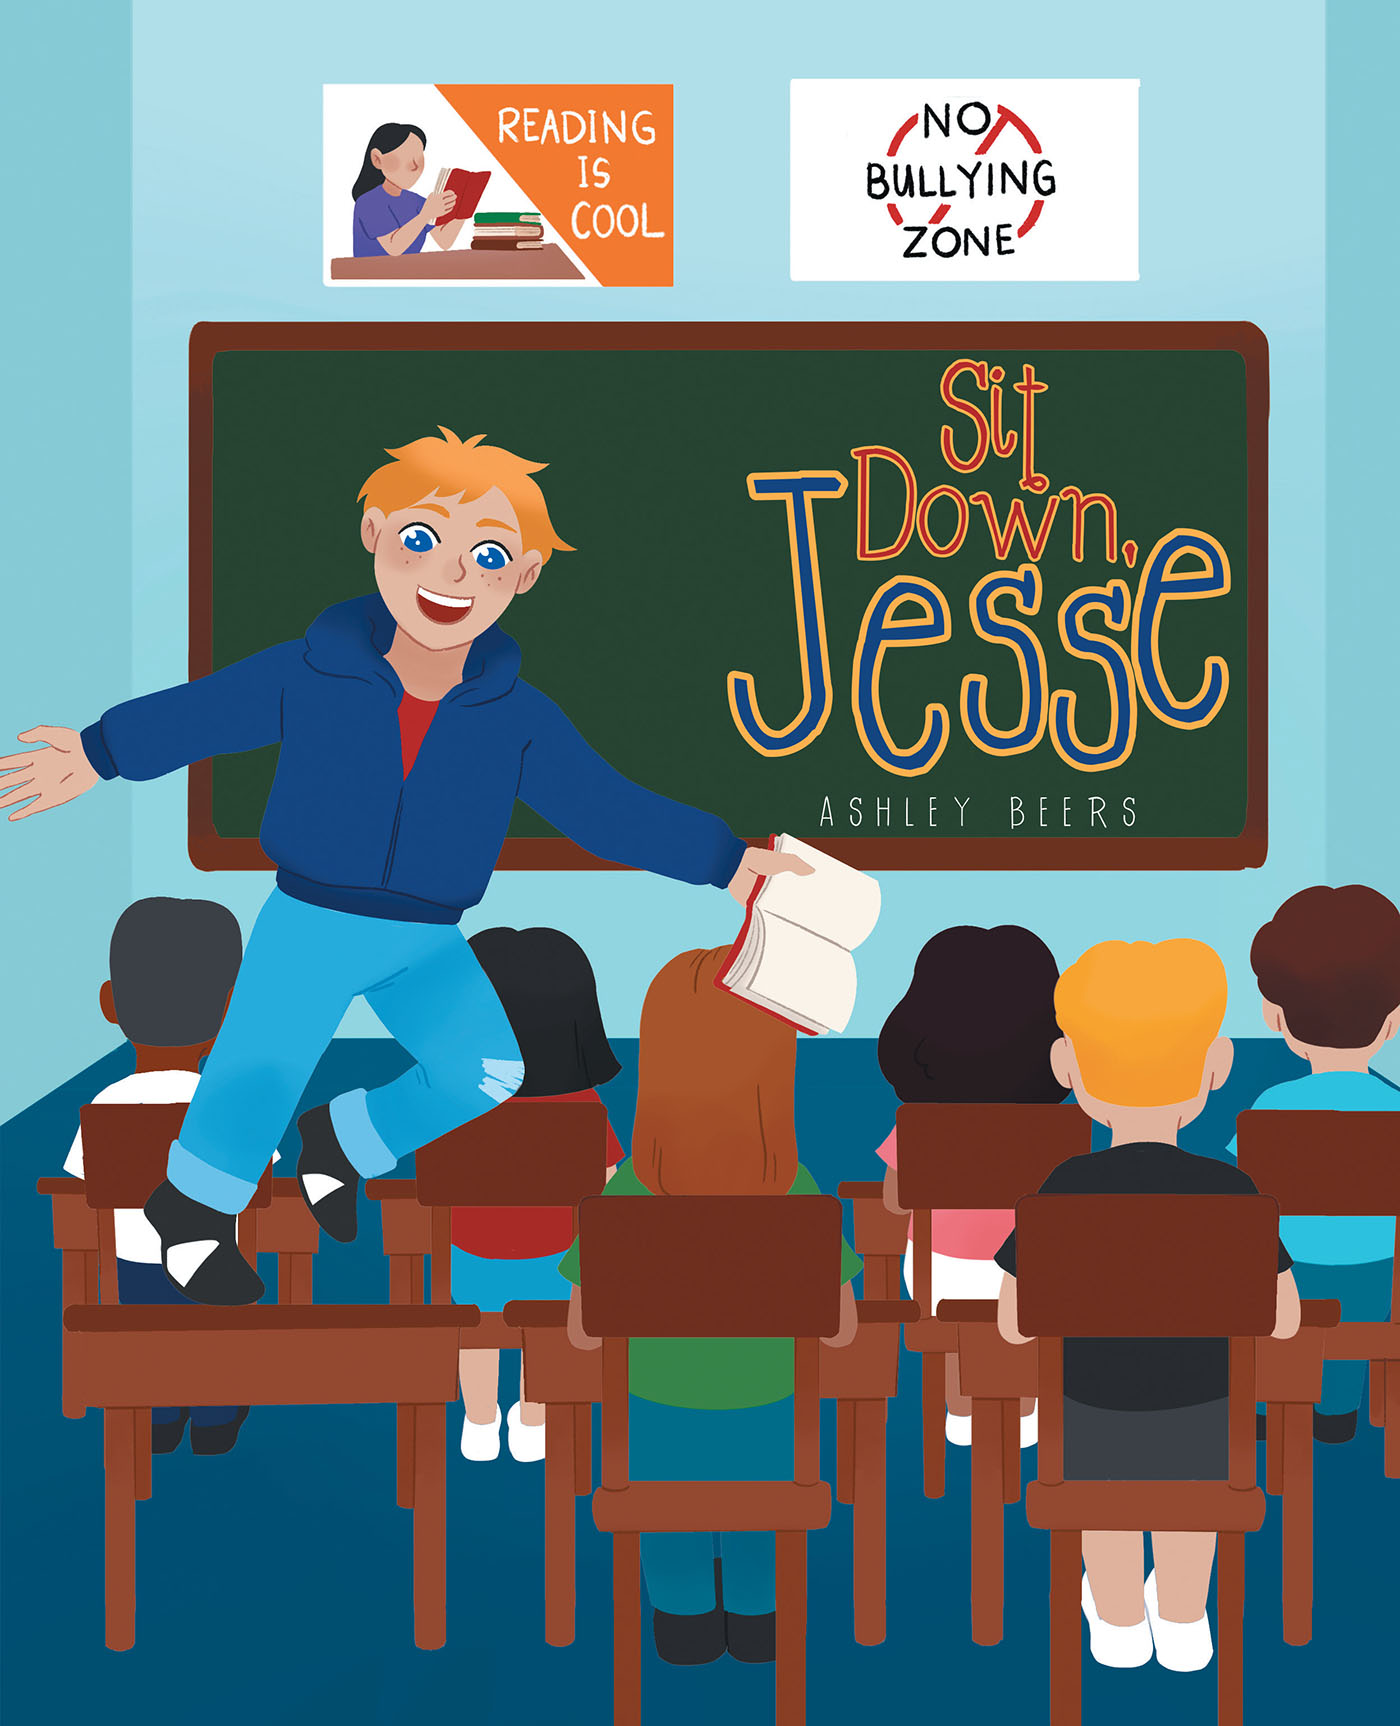 Author Ashley Beers’s New Book, "Sit Down, Jesse," is About Two Unlikely Friends Who Work Together and See Their Weaknesses Become Their Strengths